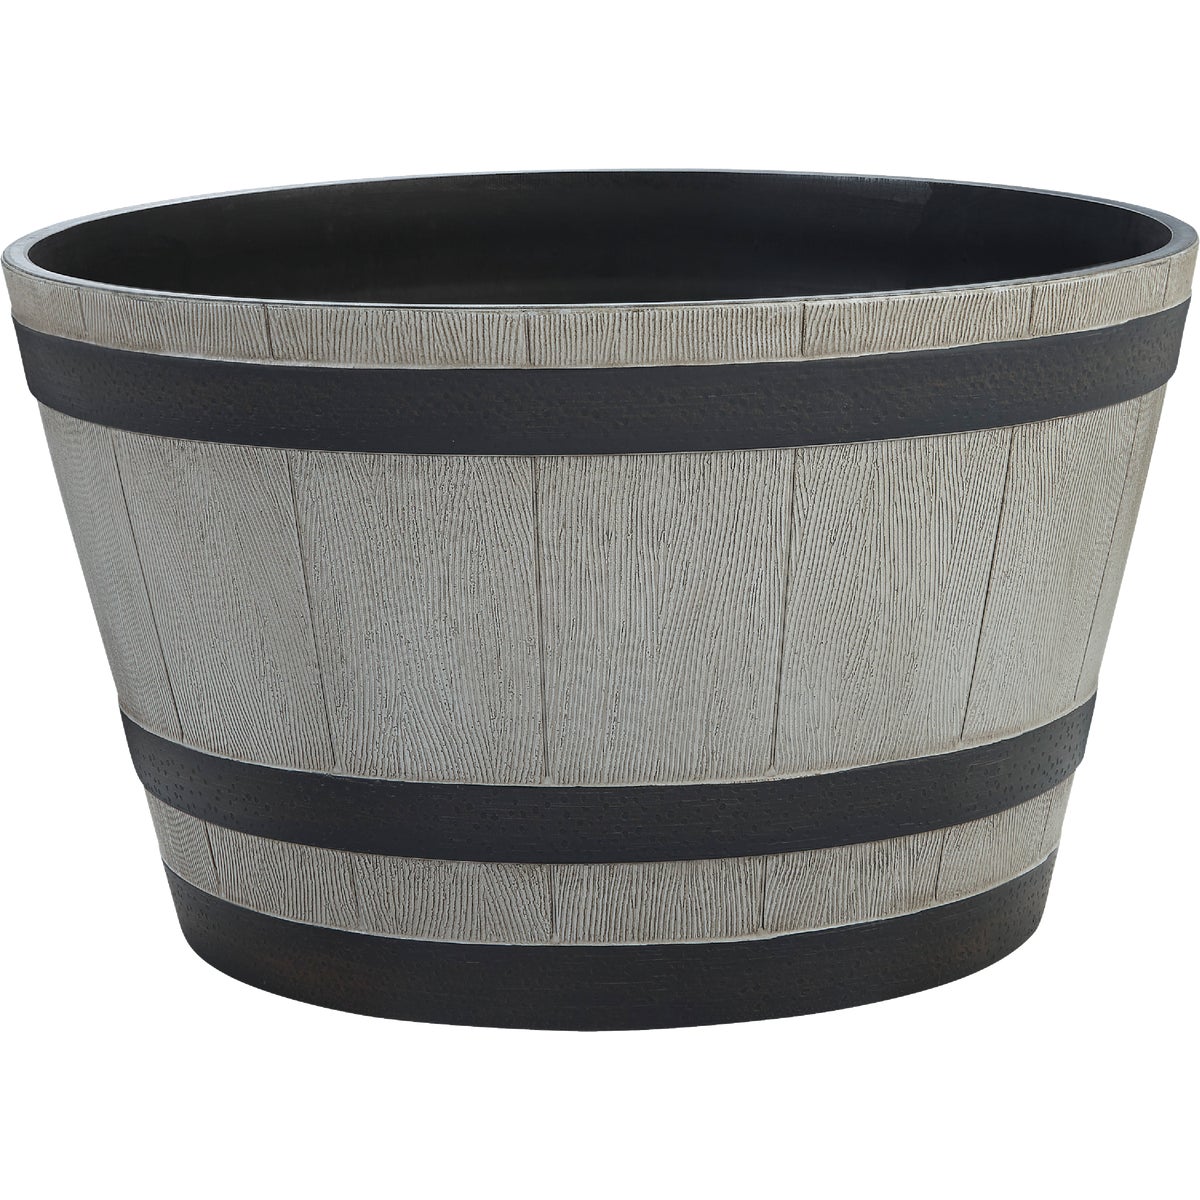 Southern Patio 13-1/2 In. H. x 22-1/2 In. Dia. Birchwood High-Density Resin Traditional Whiskey Barrel Planter